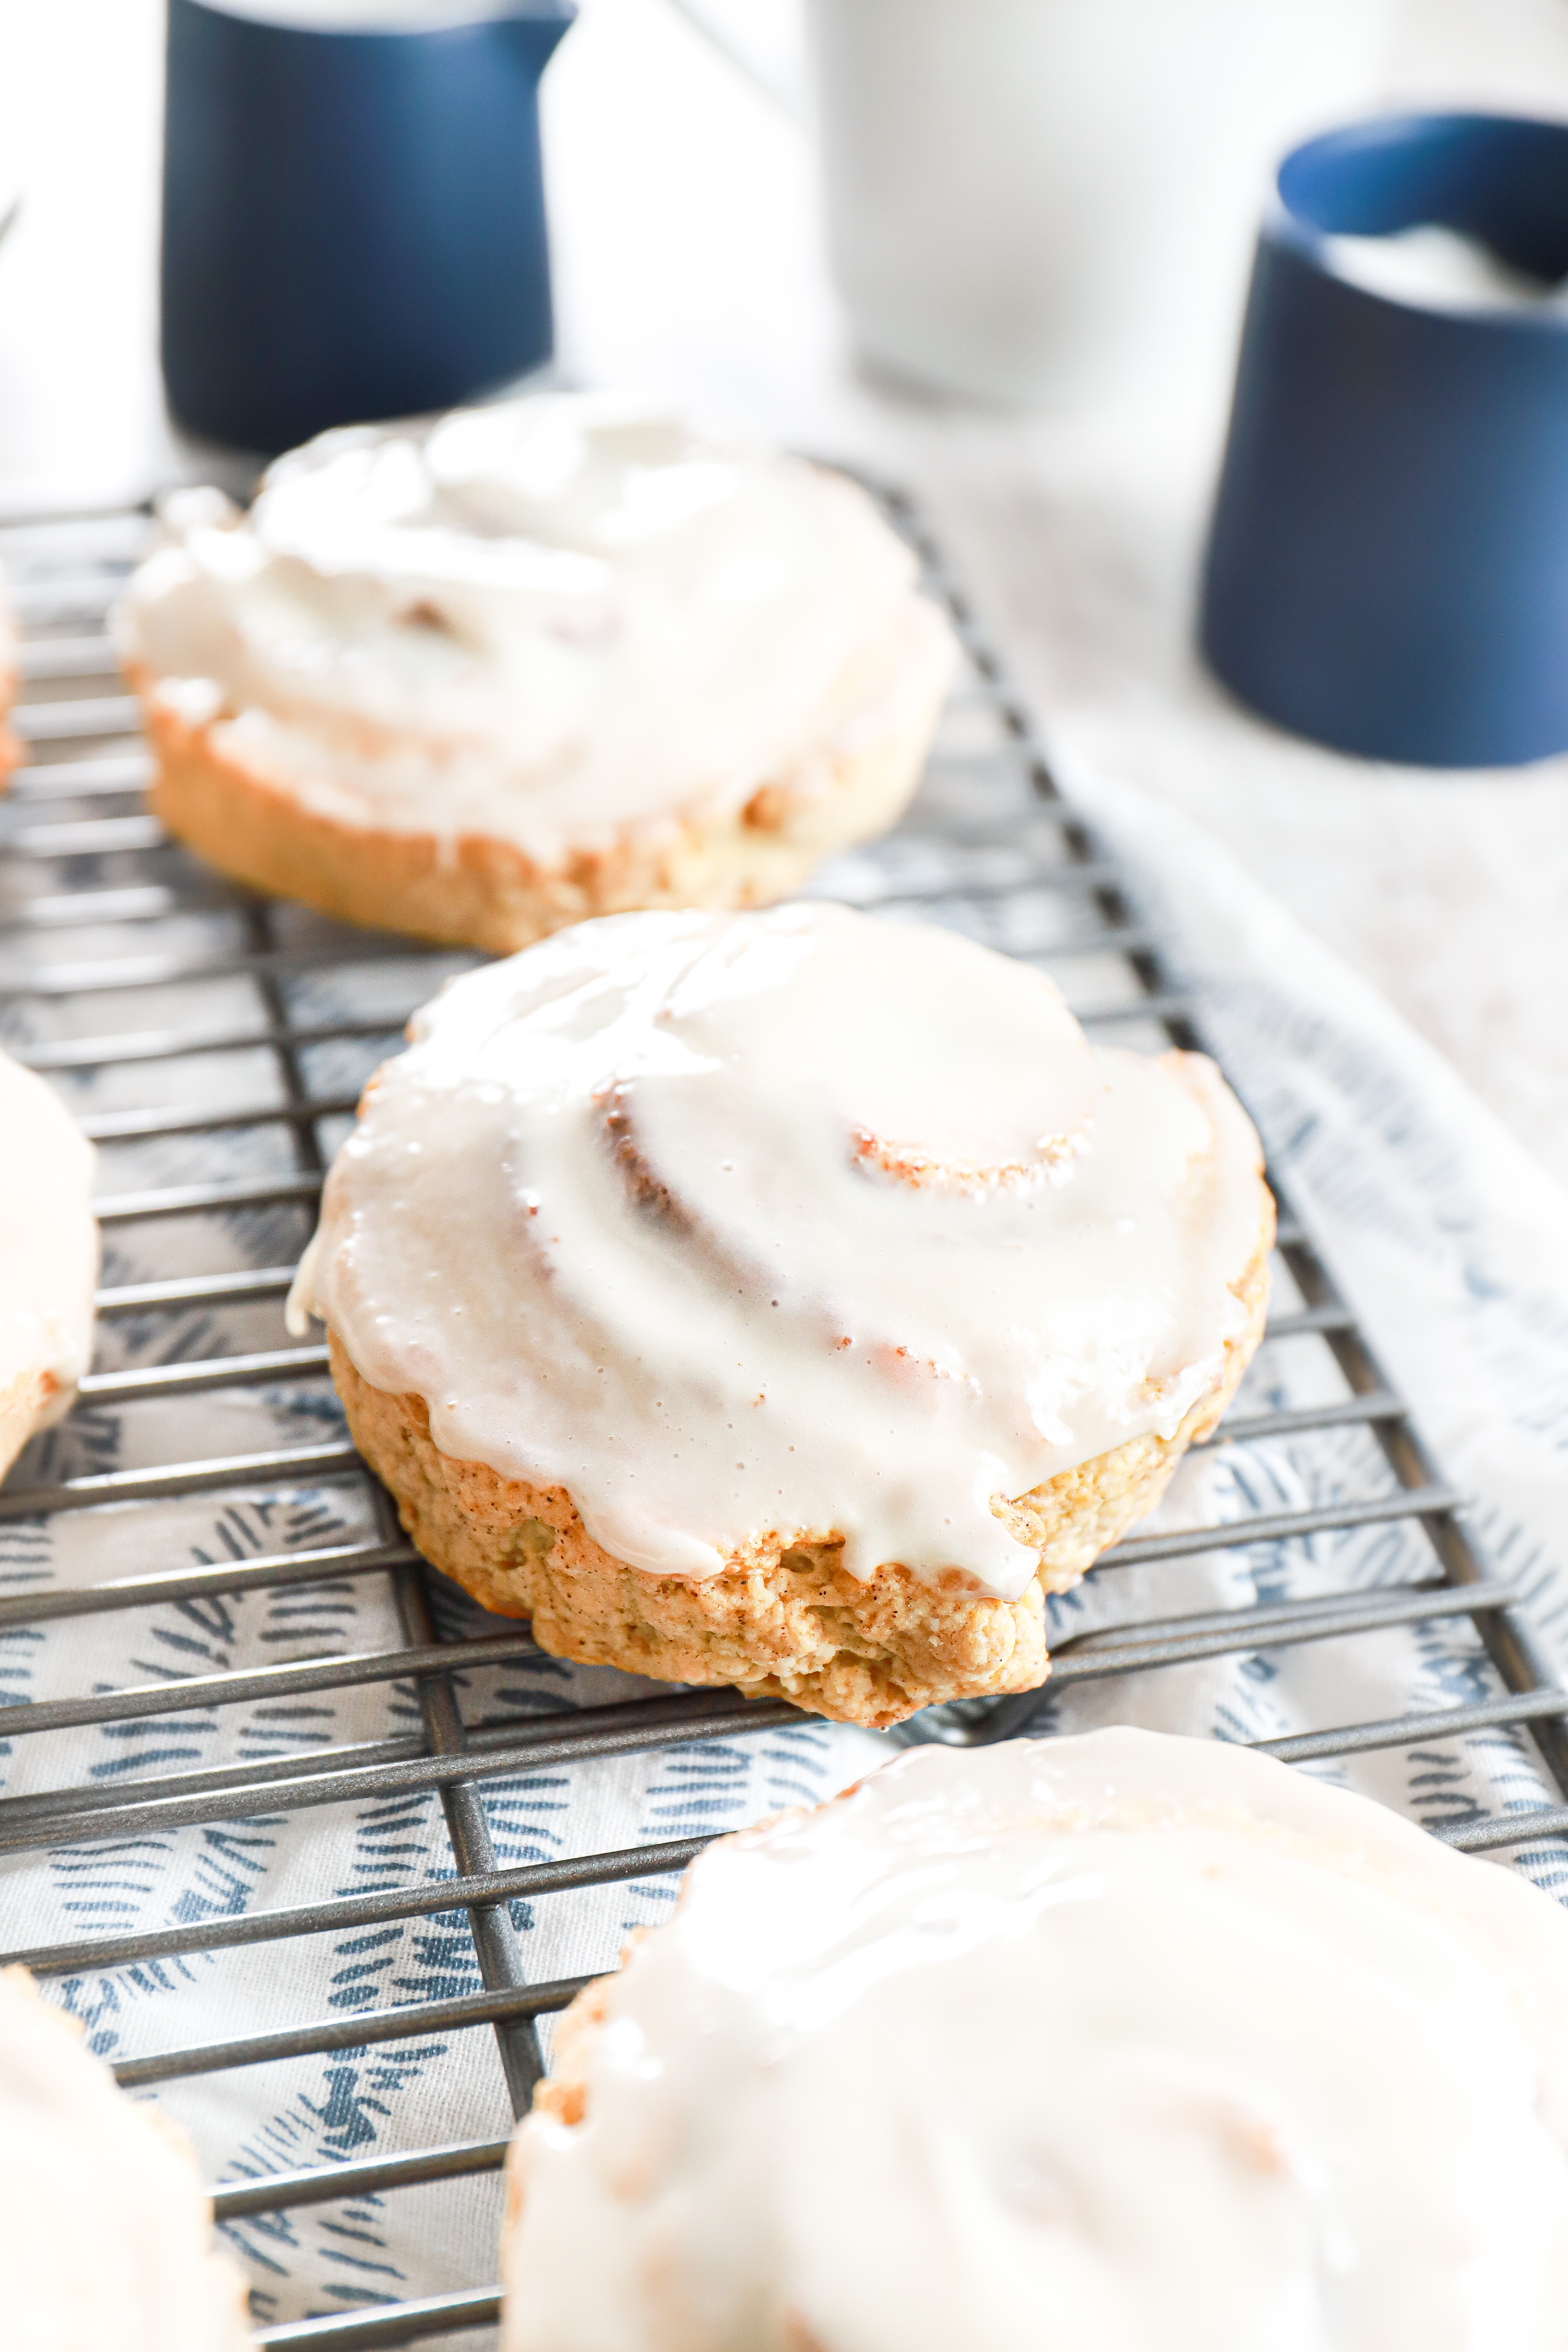 Cinnamon roll scones on a wire cooling rack with blue sugar and cream containers in the background.